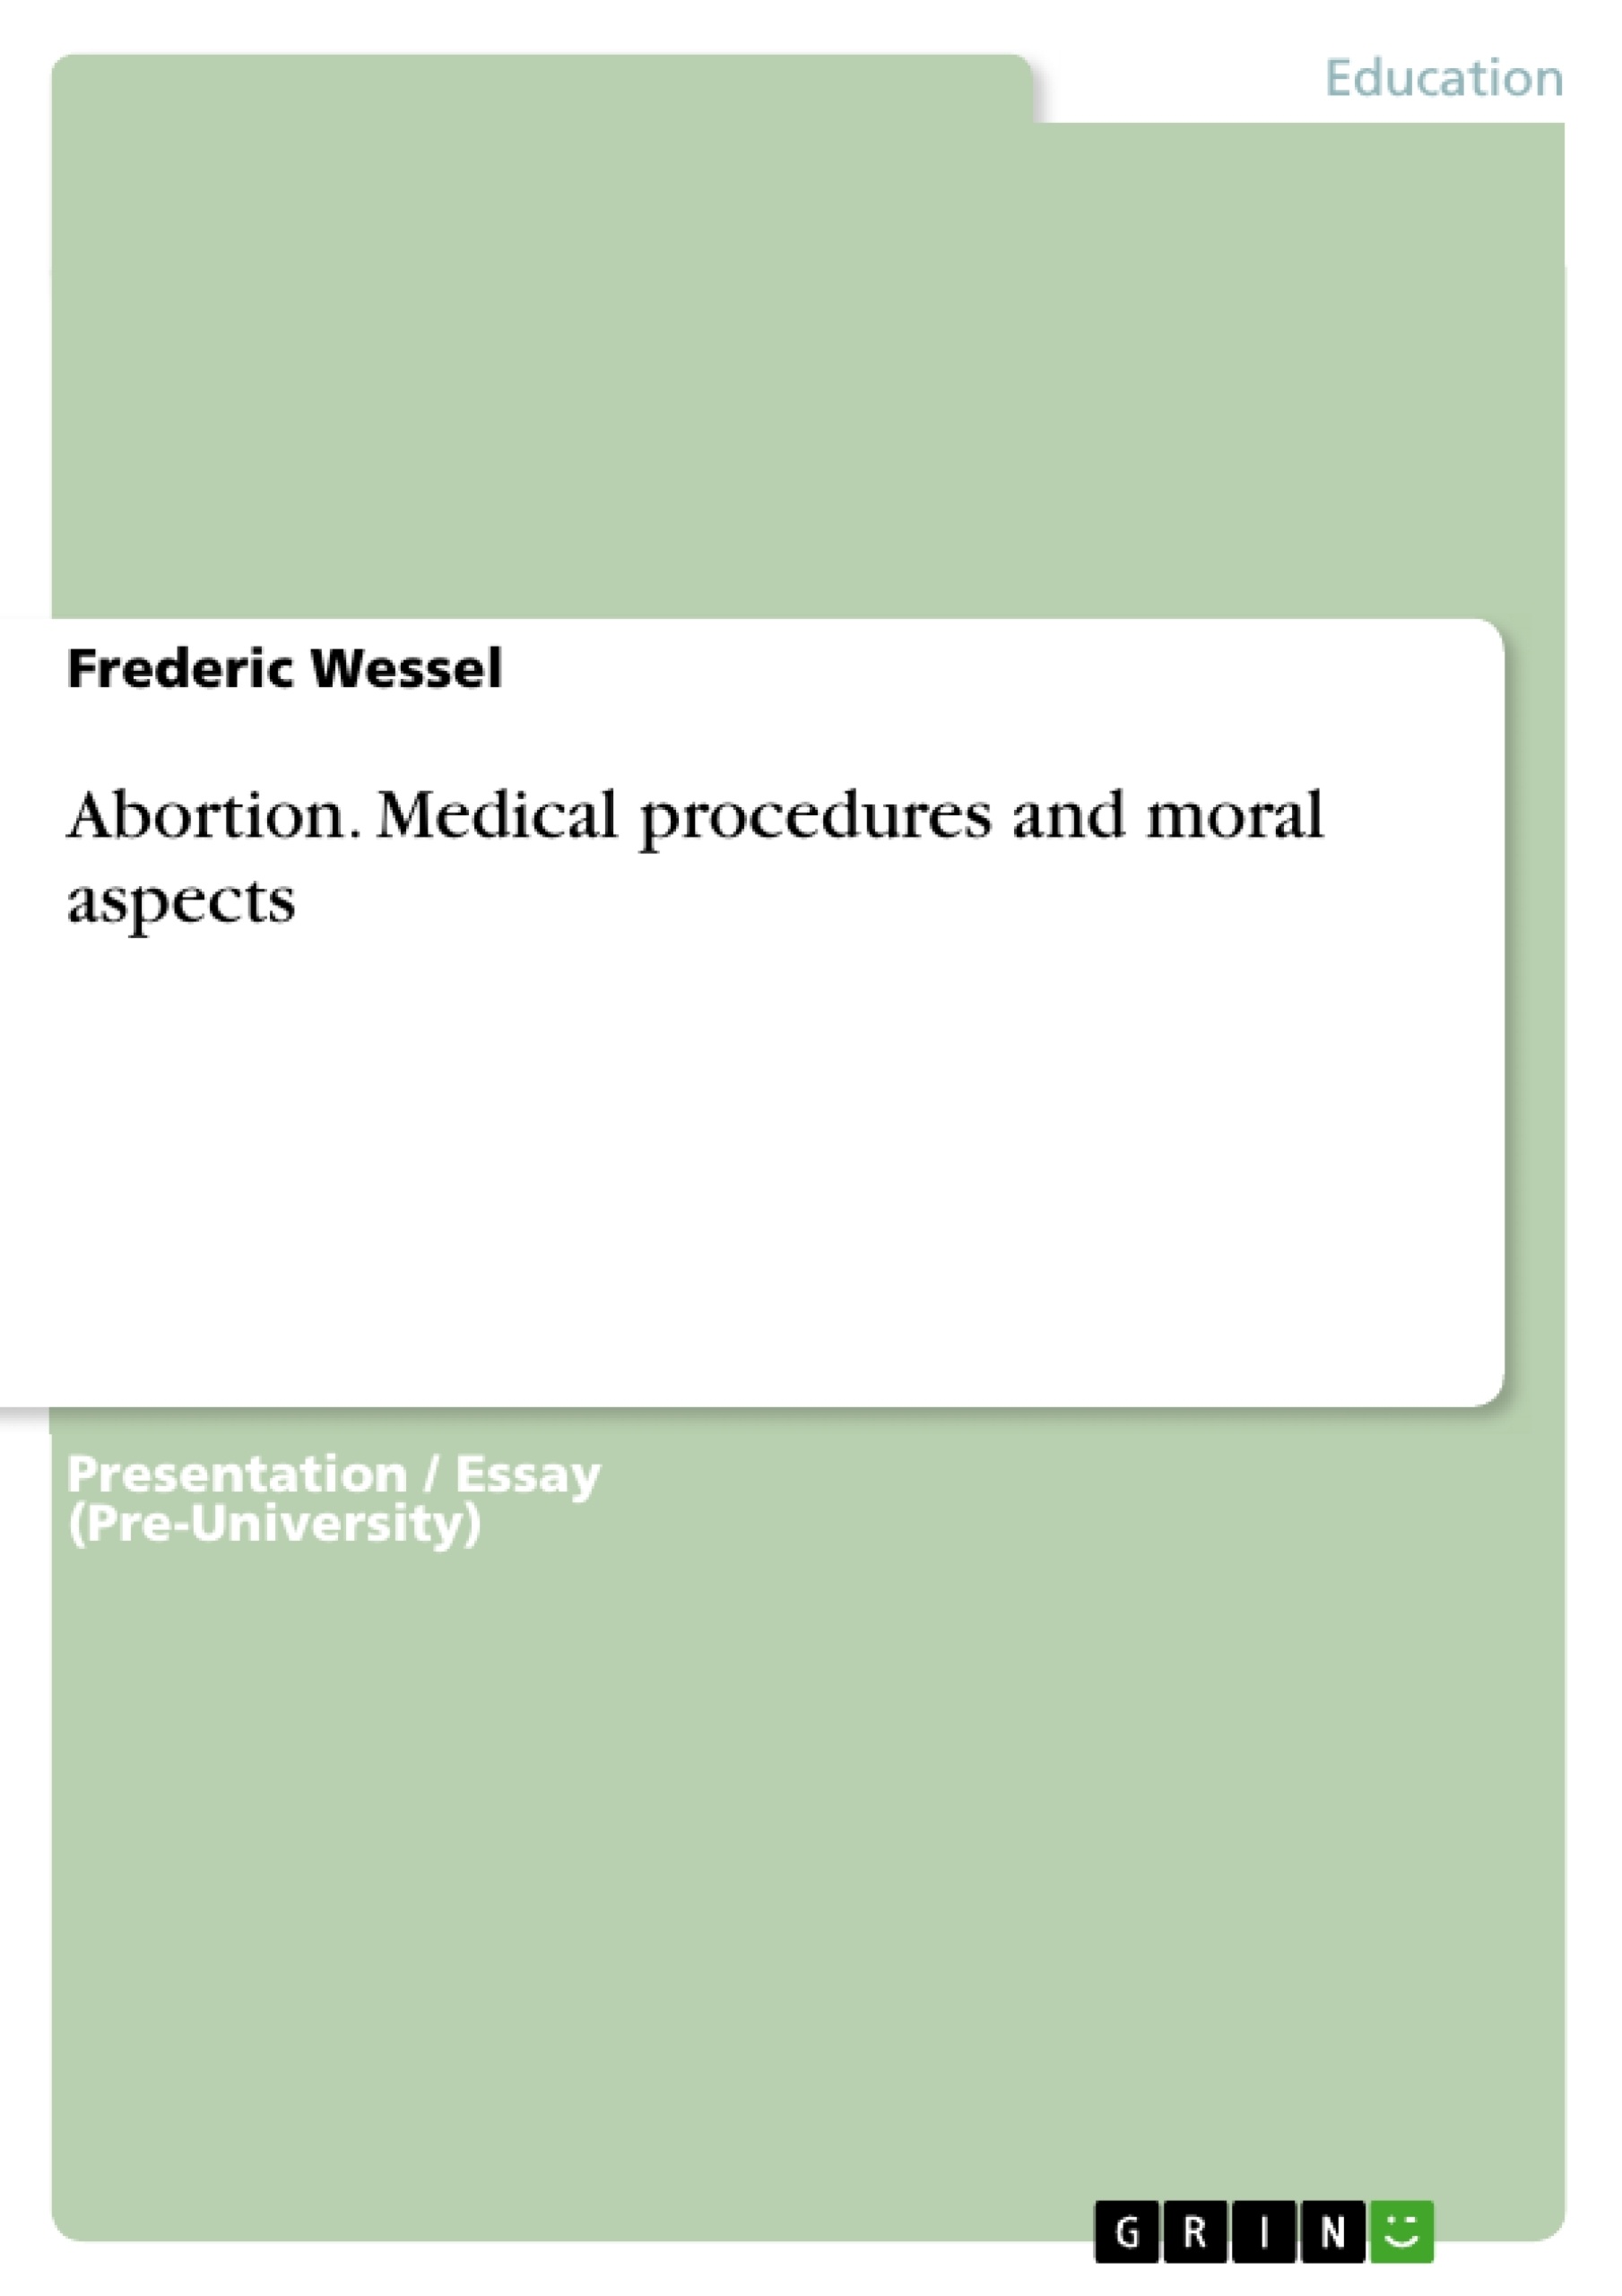 Título: Abortion. Medical procedures and moral aspects